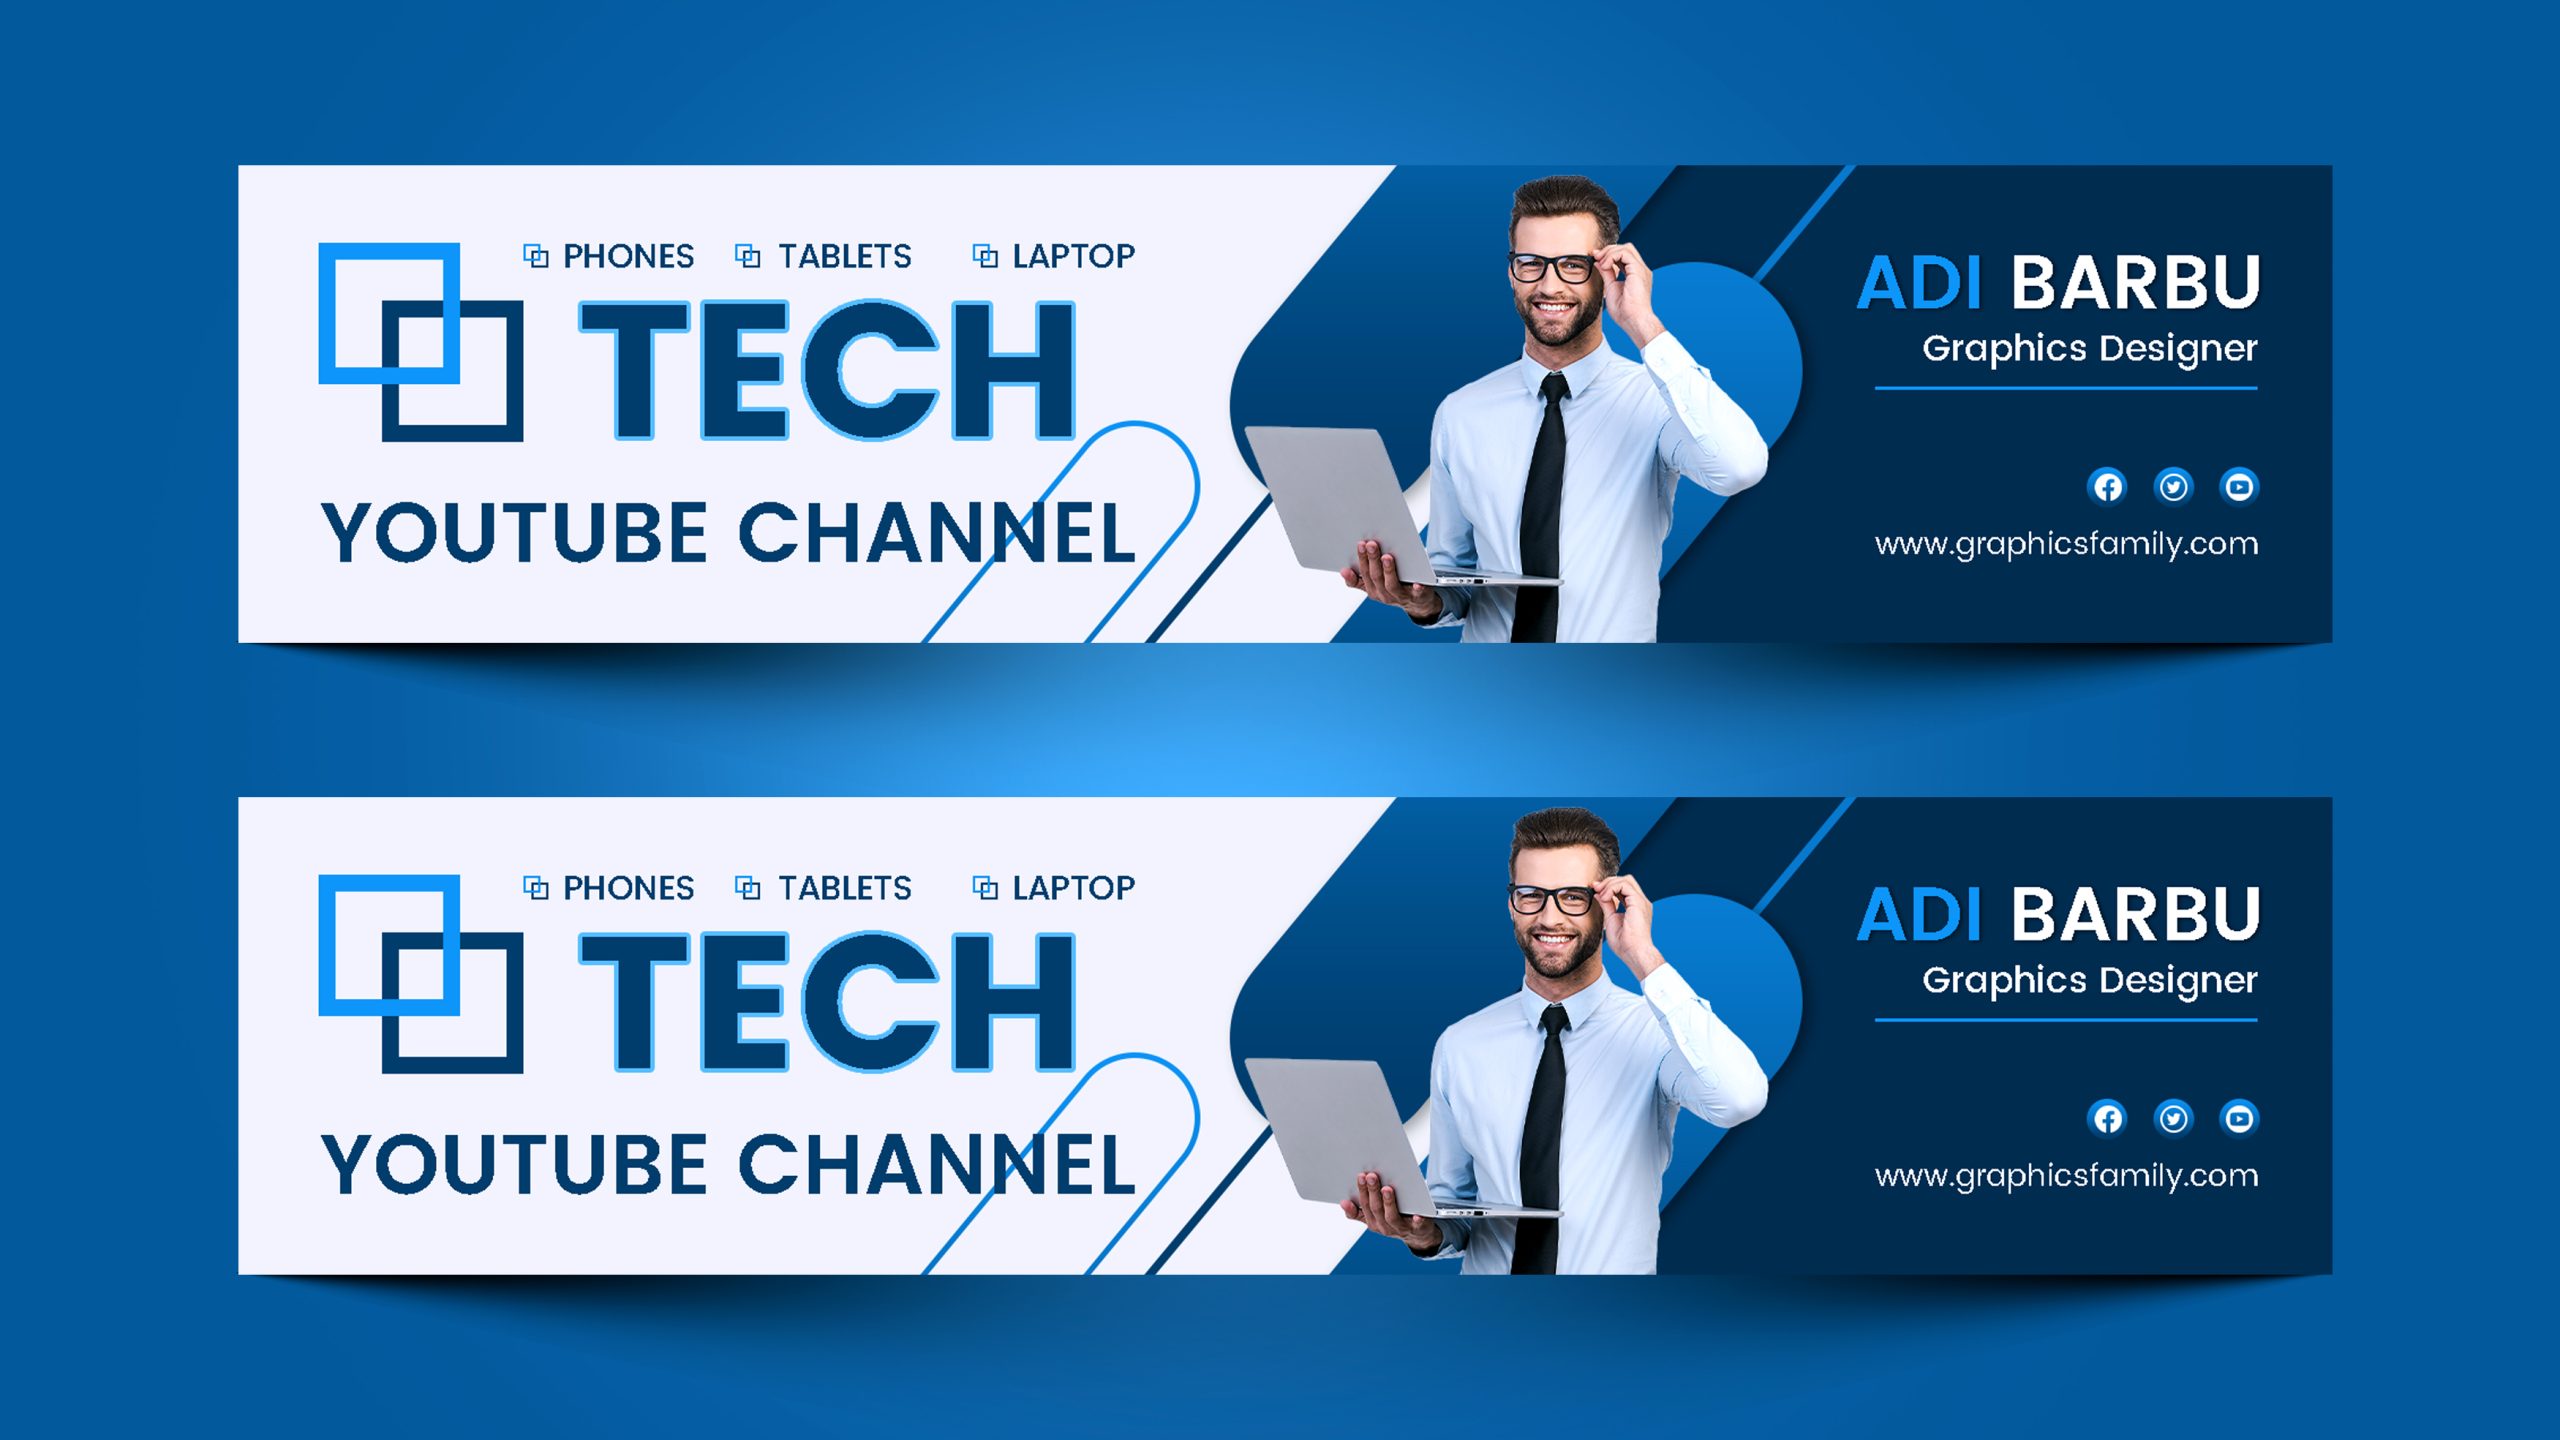 Tech Channel Art Design Template for YouTube – GraphicsFamily